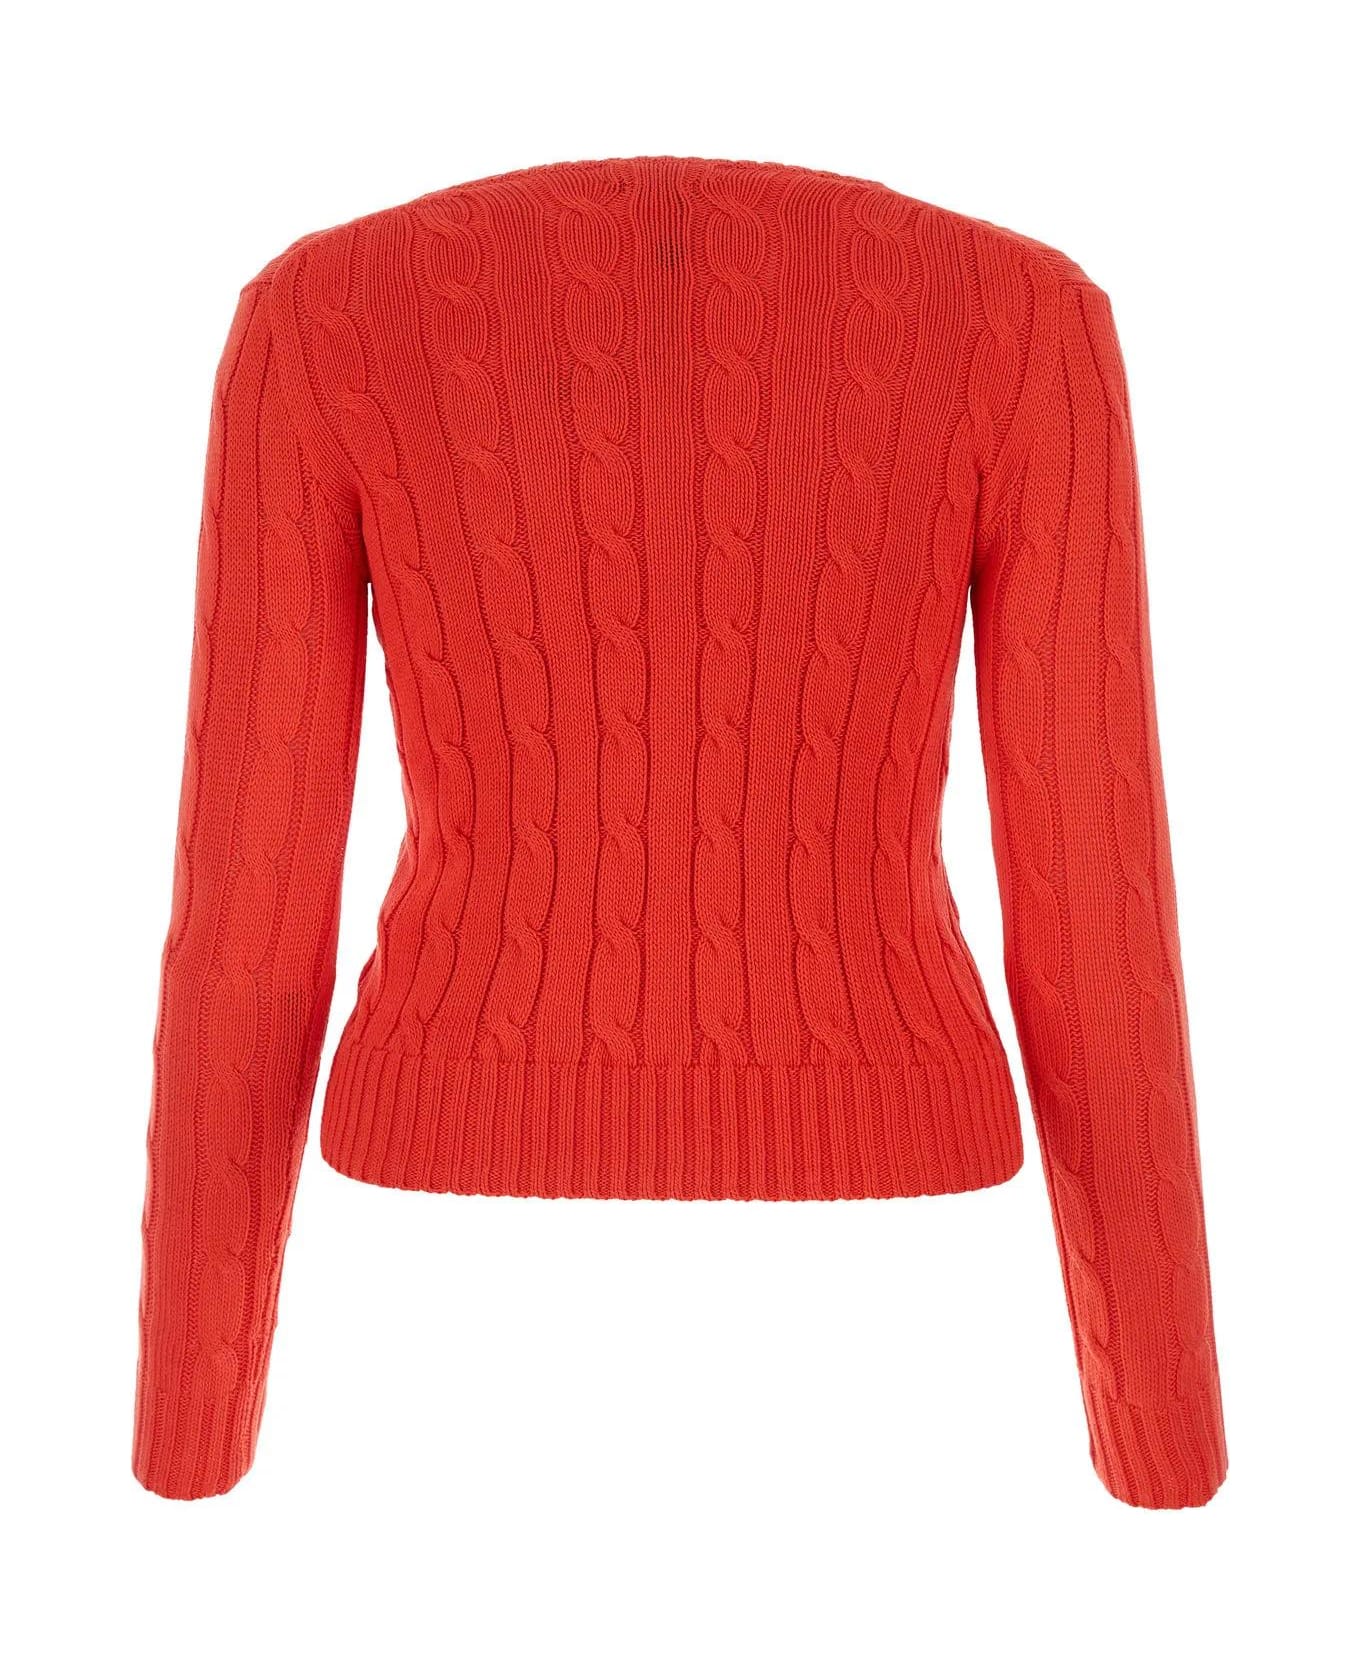 Polo Ralph Lauren Red Cotton Sweater - Red